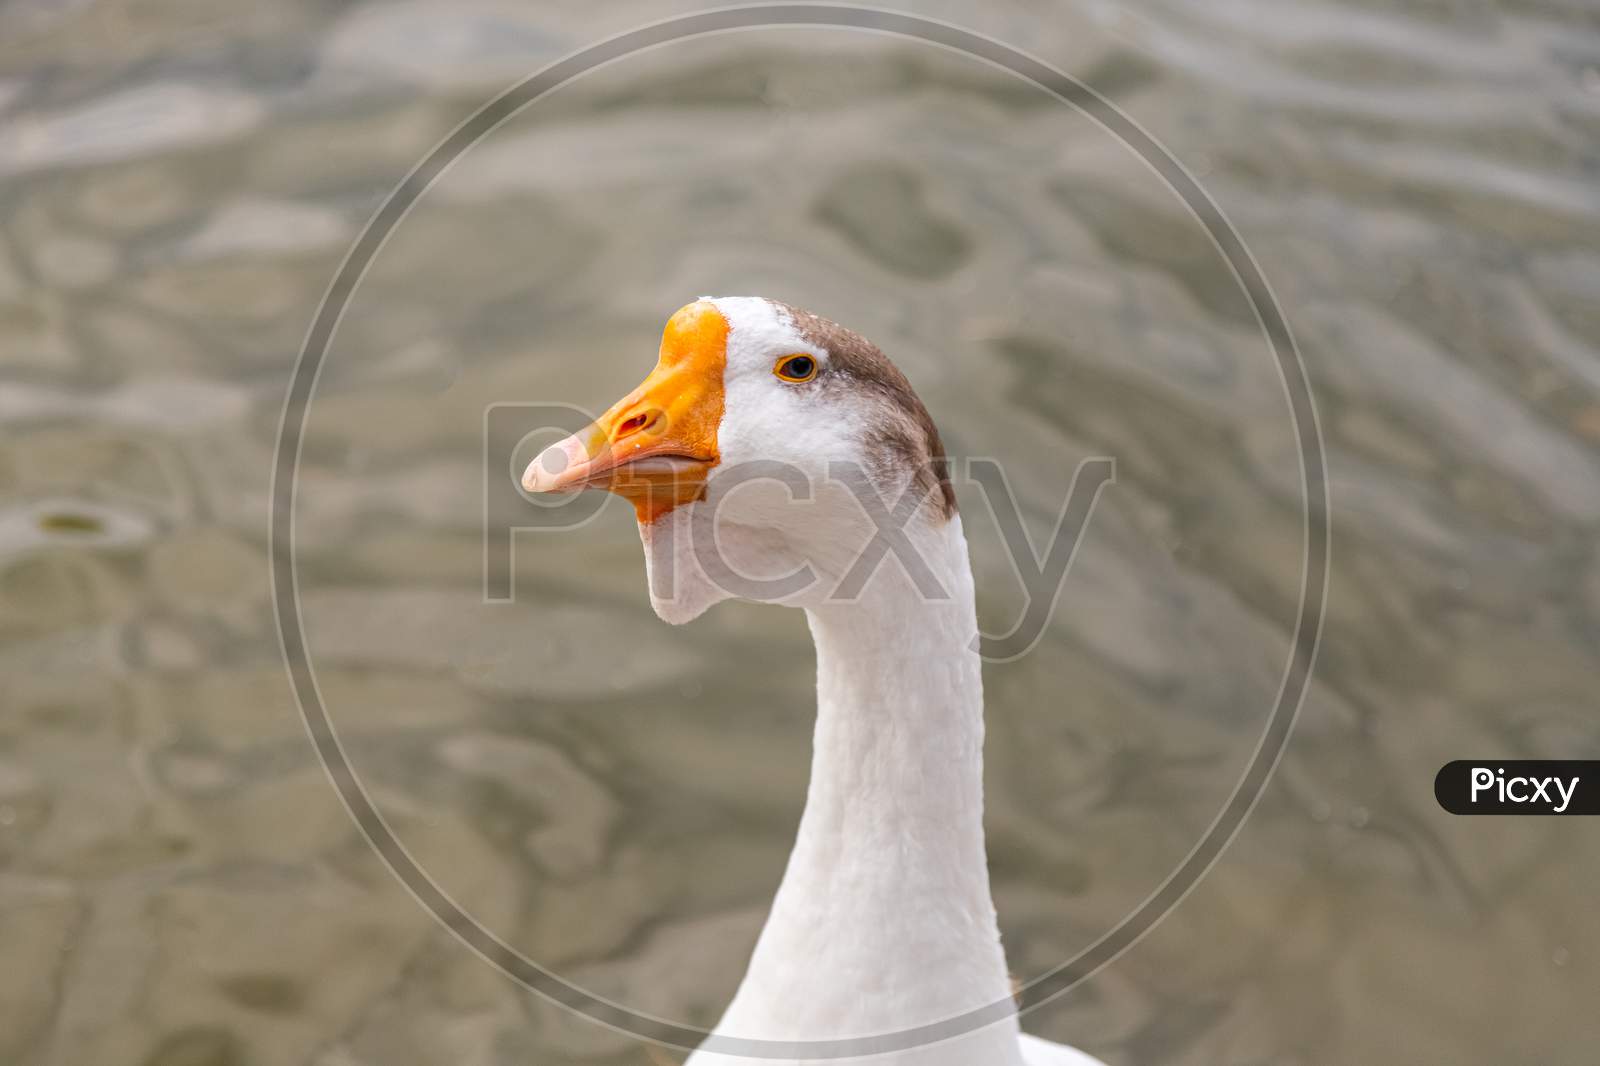 An Adult White Goose With A Brown Crest And A Yellow Beak Looks At The Camera Against The Backdrop Of A Pond. Portrait Of A Domestic Goose